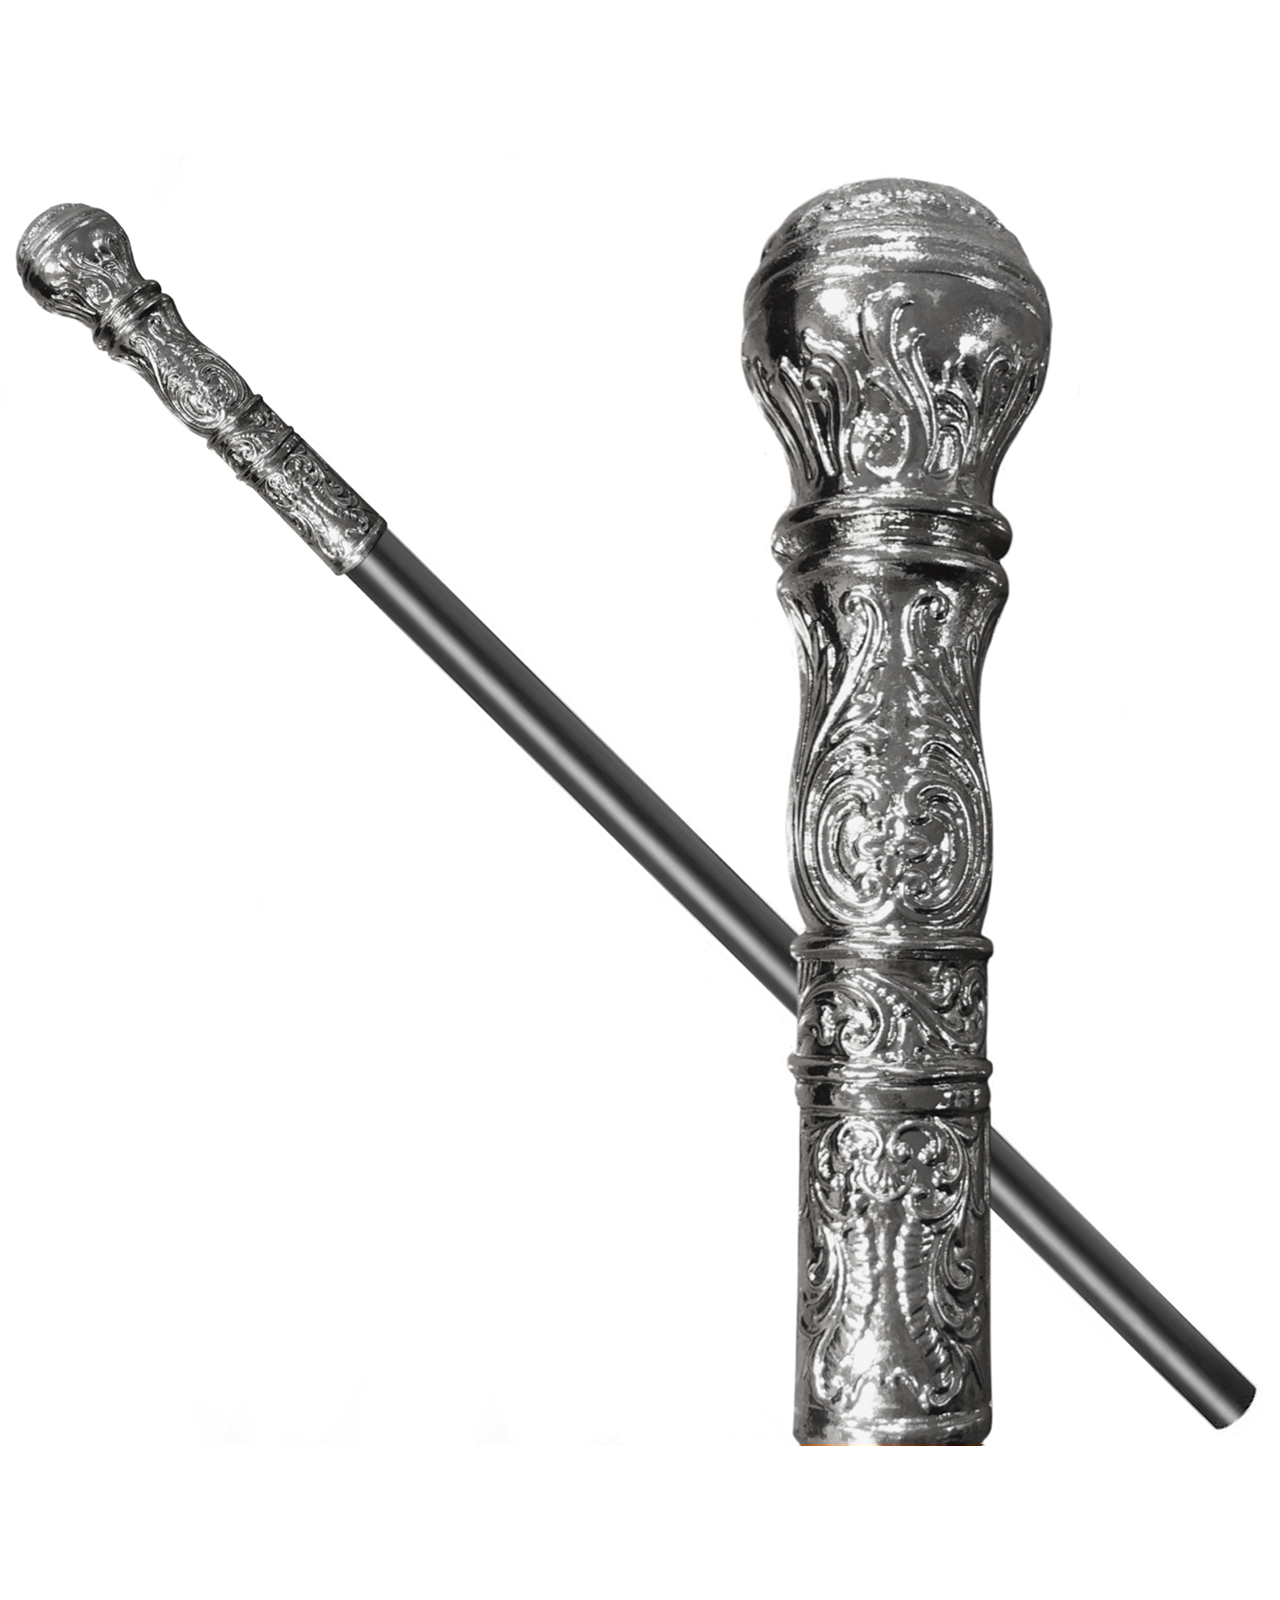 Silver Collapsible Dance Cane